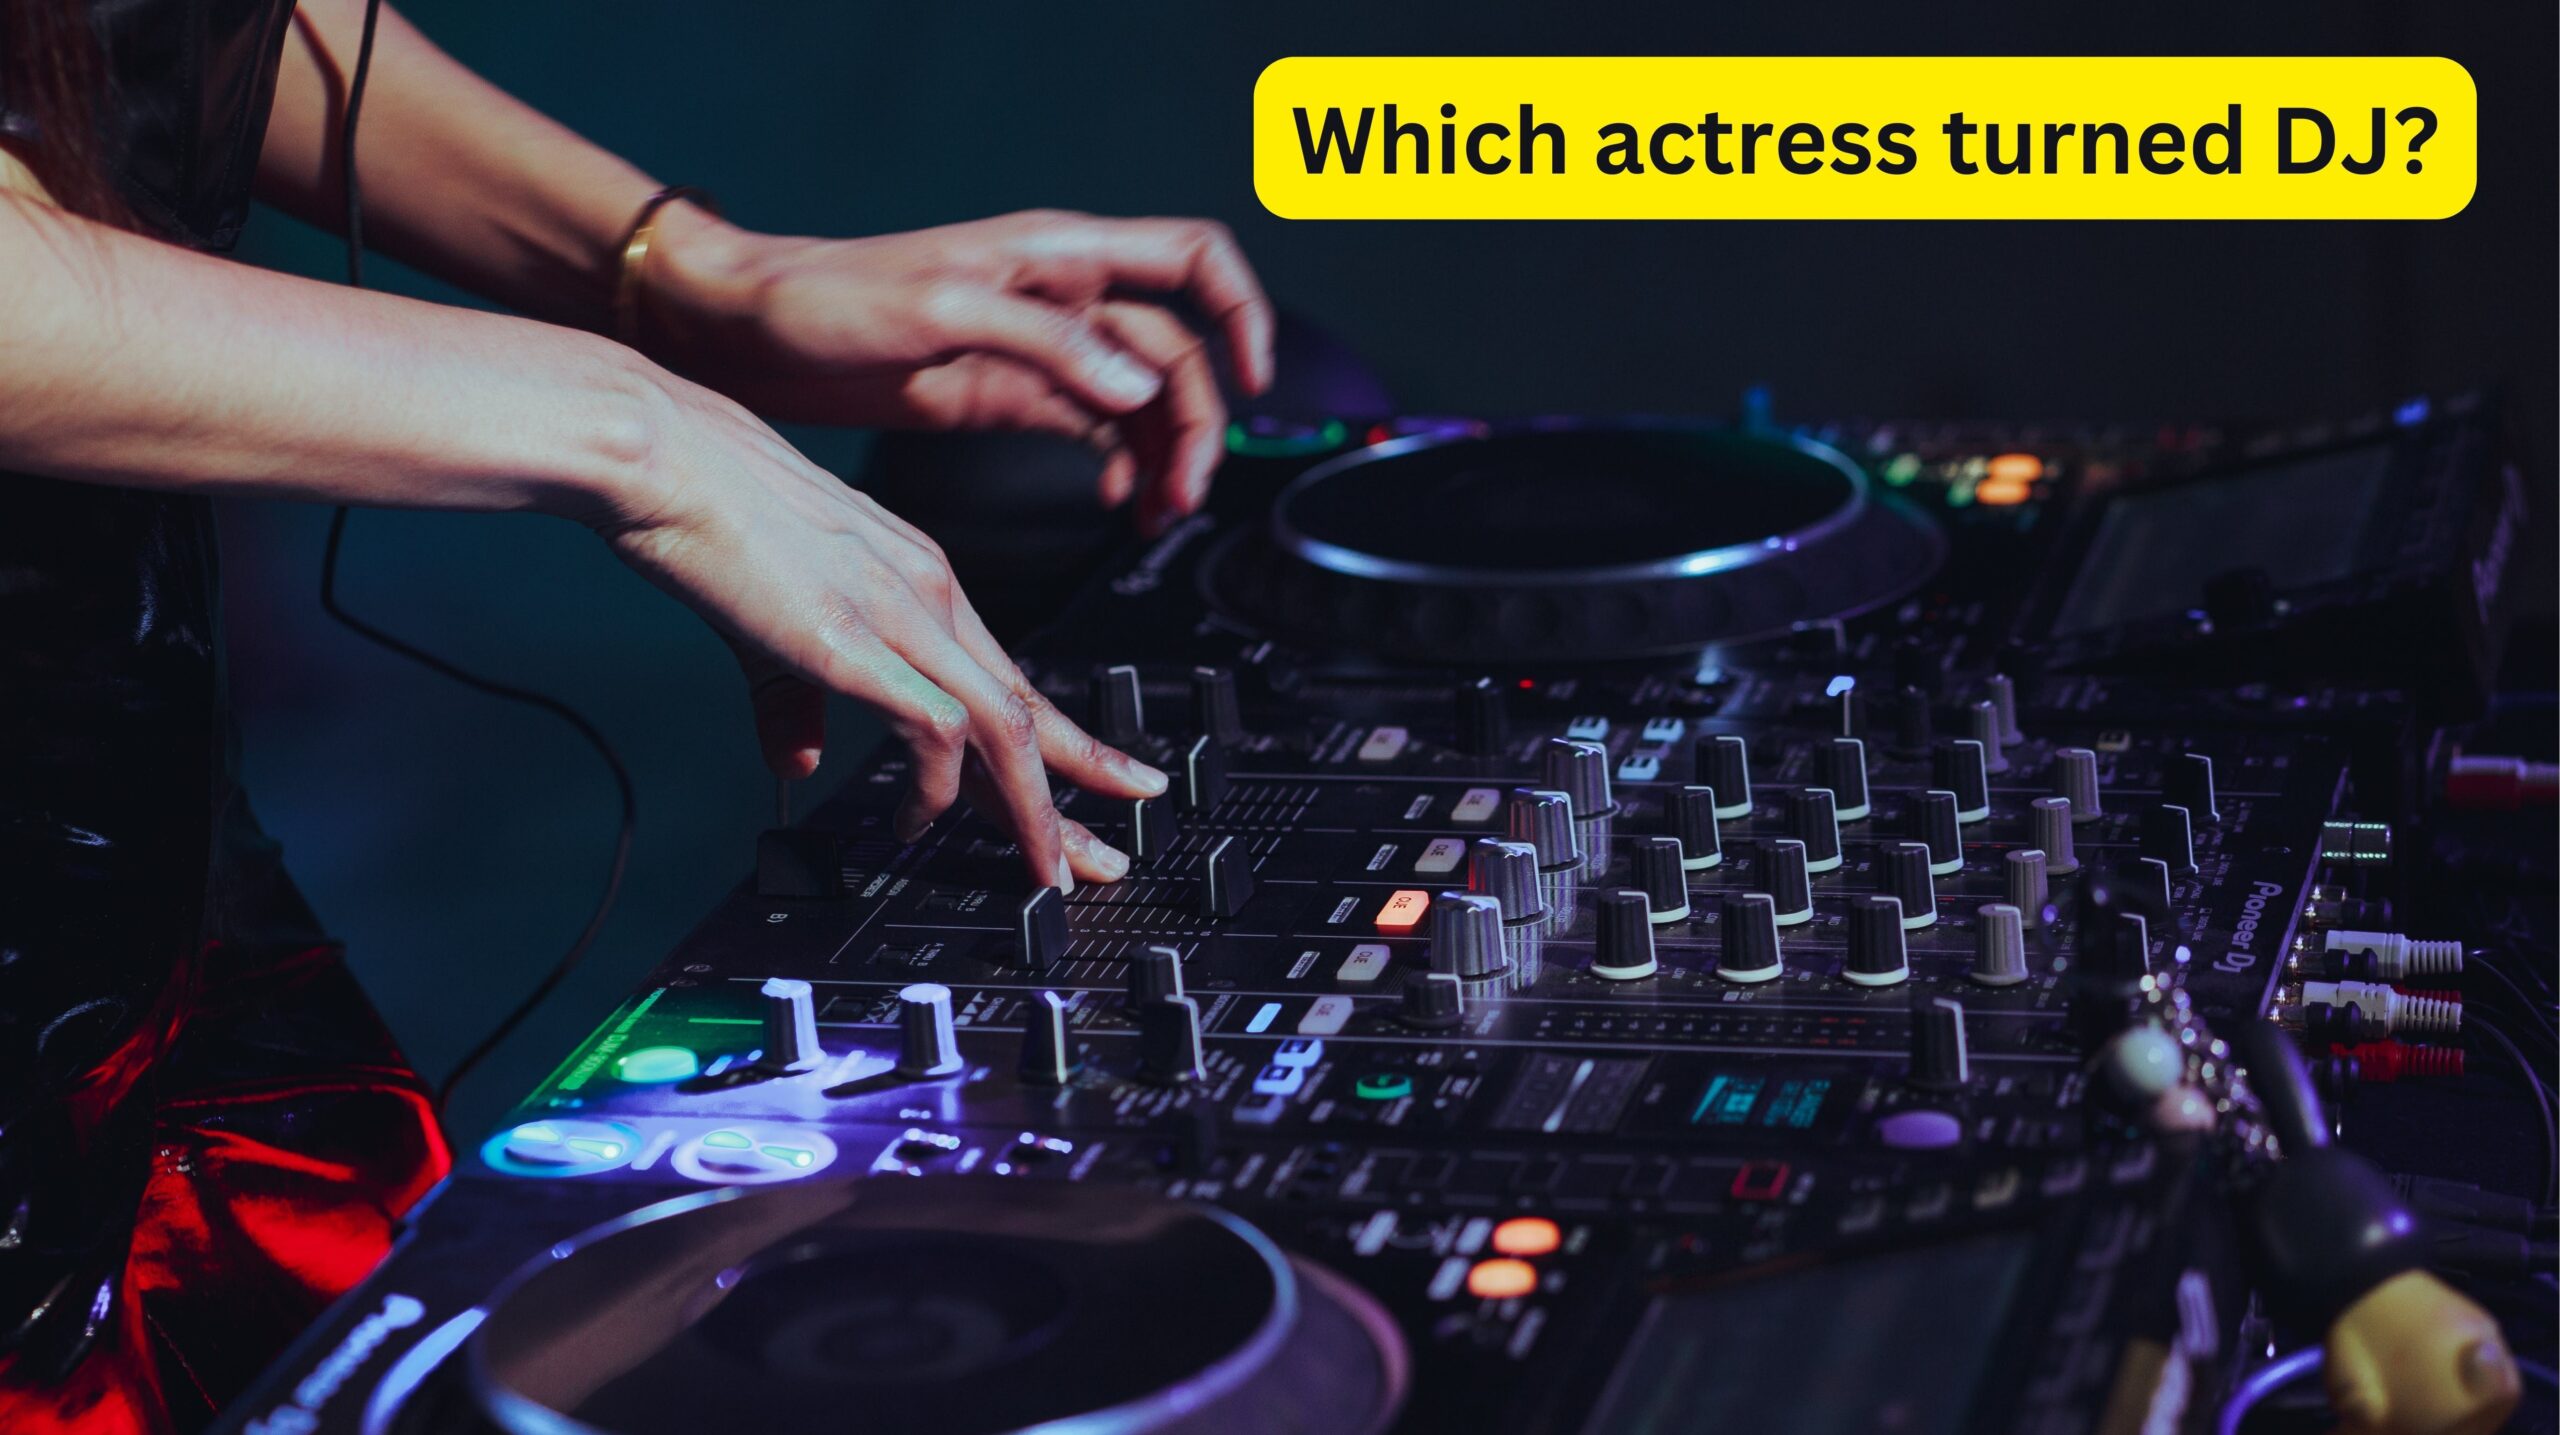 Which actress turned DJ?